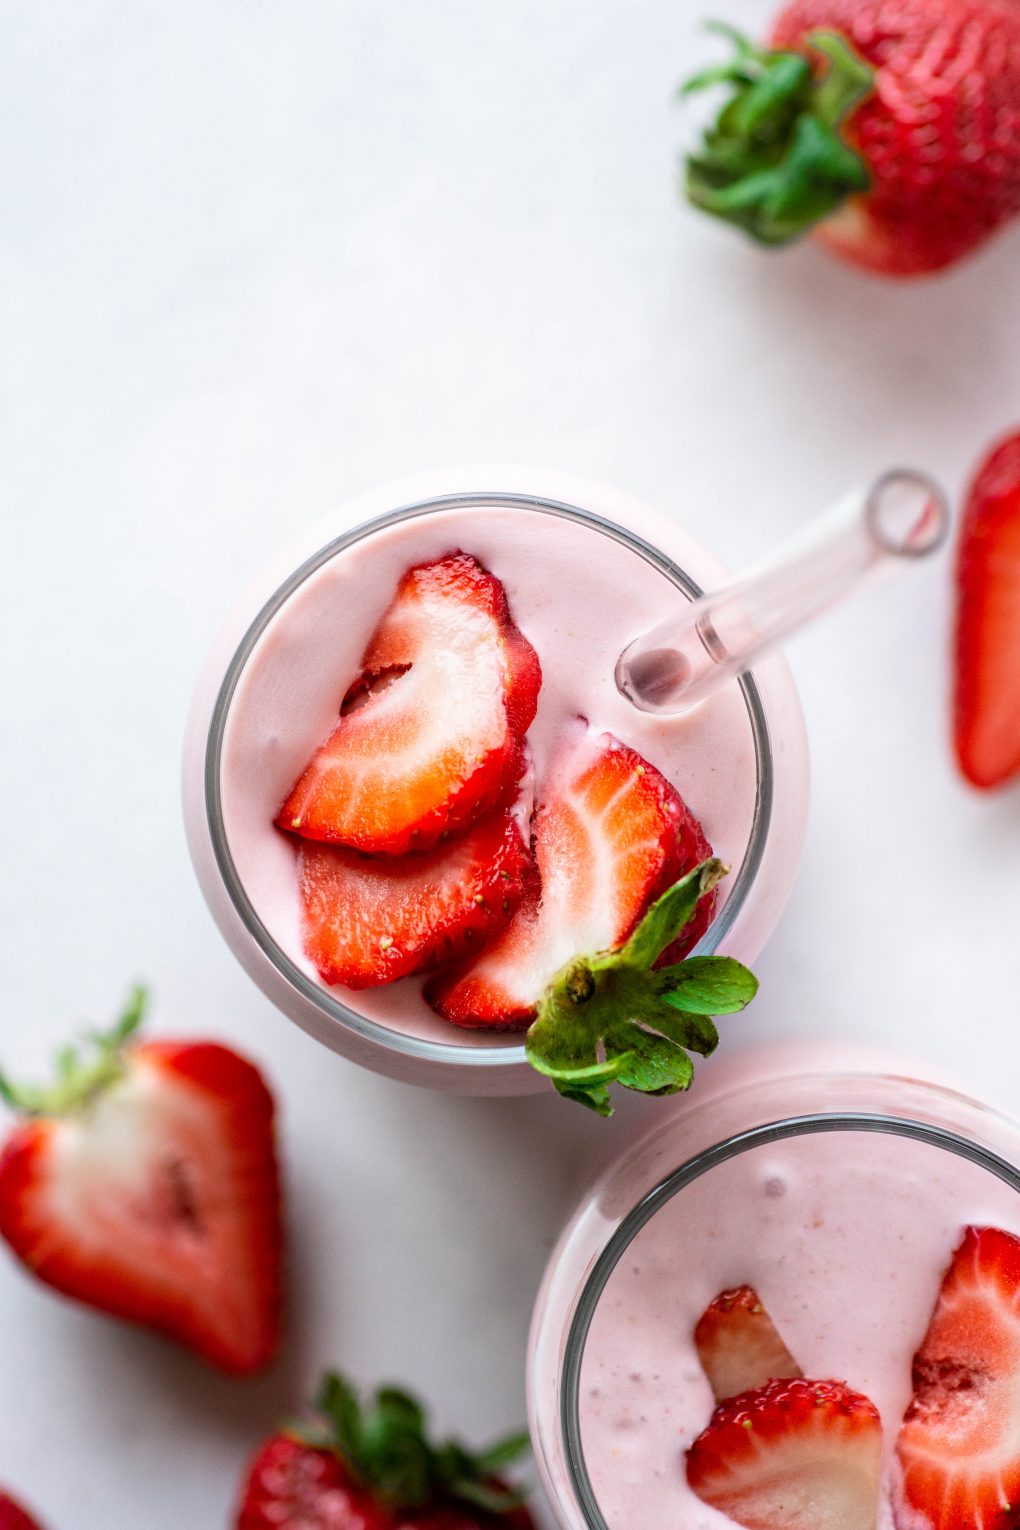 Over head shot of two side by side pink strawberry coconut milk shakes topped with fresh sliced berries on a white background surrounded by more fresh strawberries